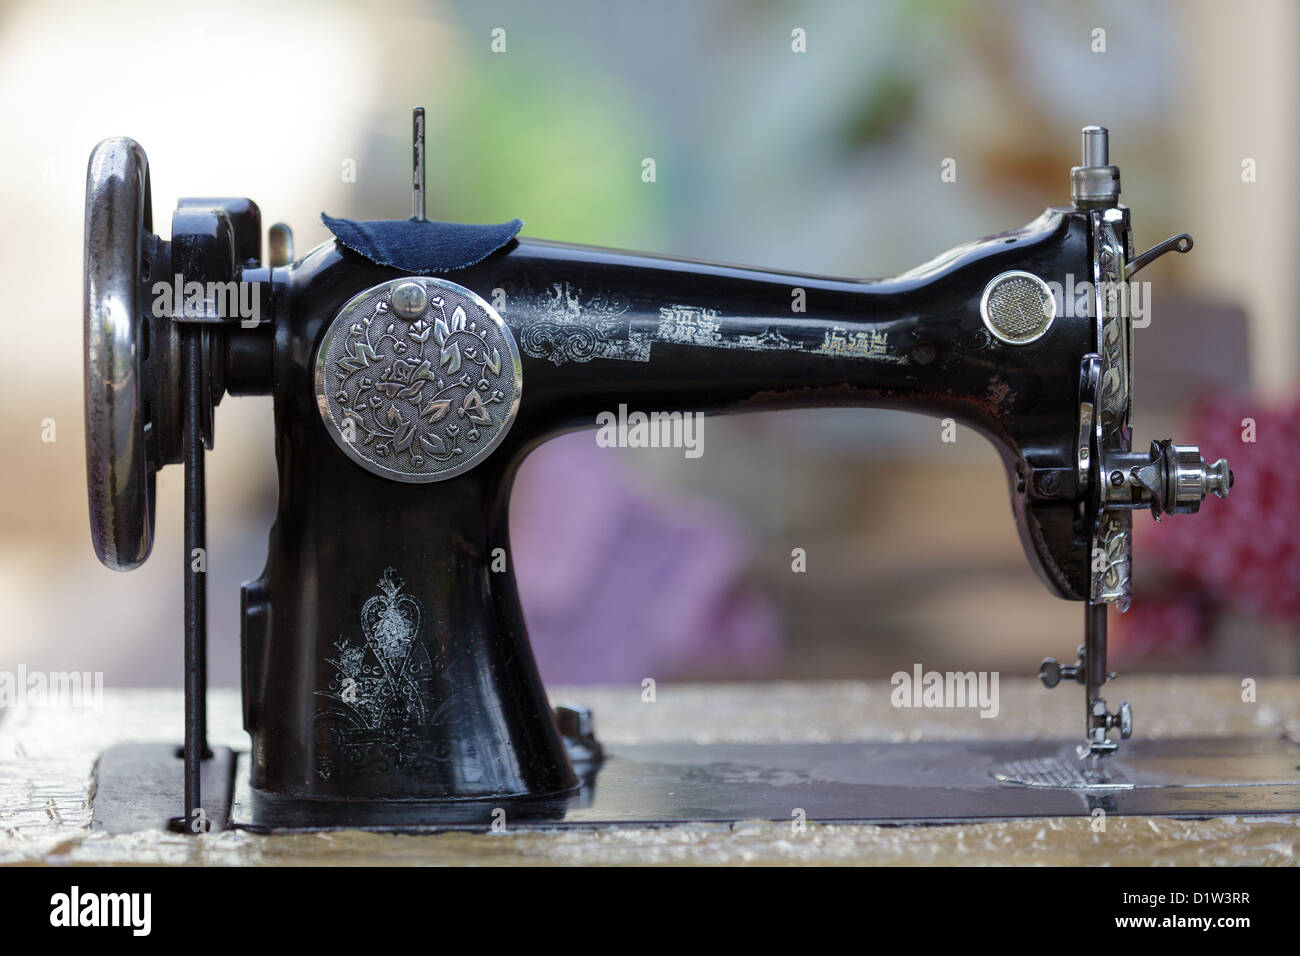 Old traditional metallic sewing machine with many asian decorations, Thailand Stock Photo